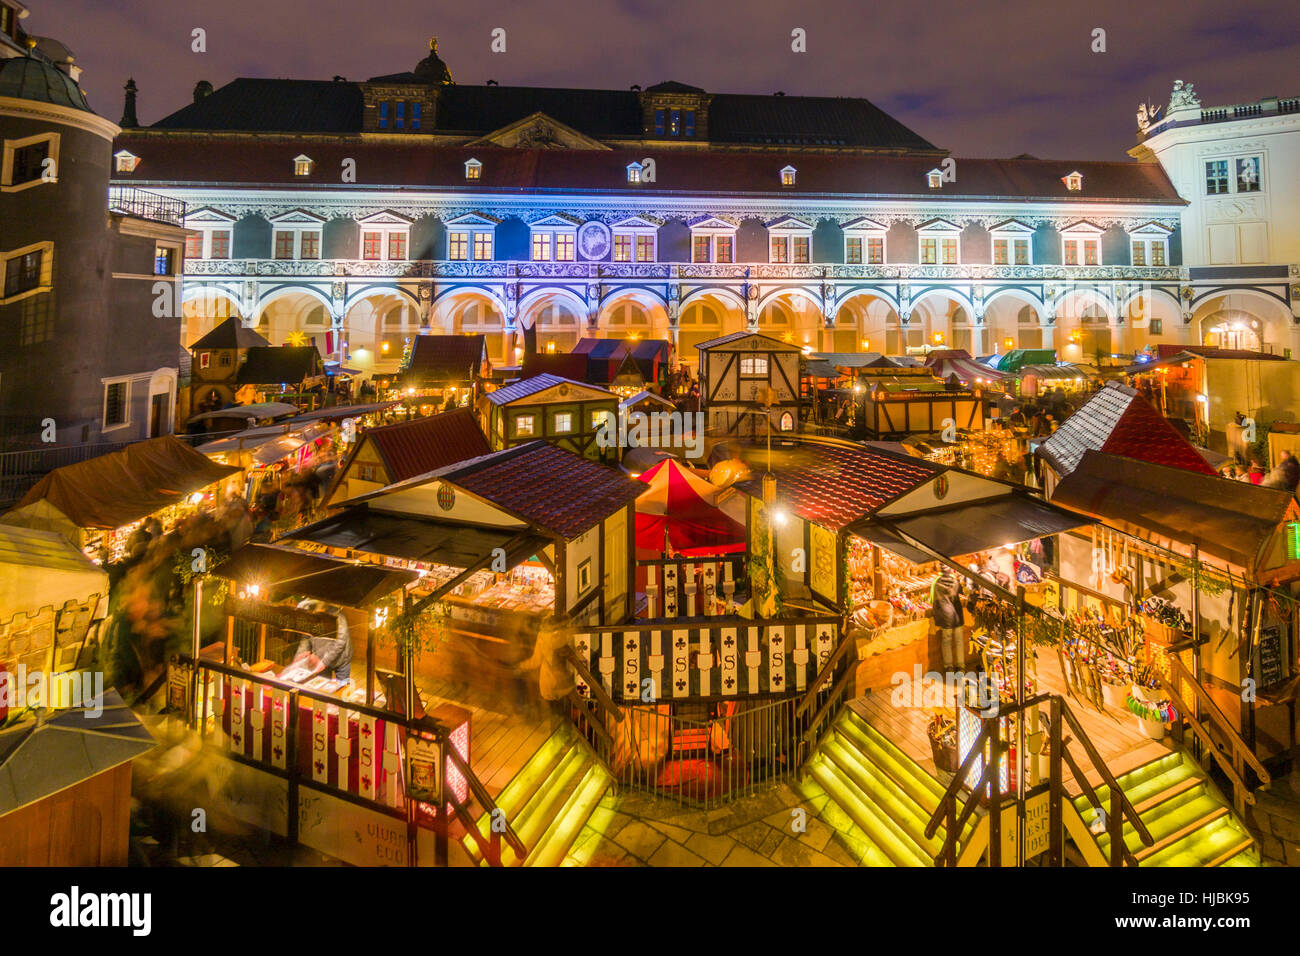 The historical, Renaissance-style Christmas market in the former horse stable Stallhof Stock Photo